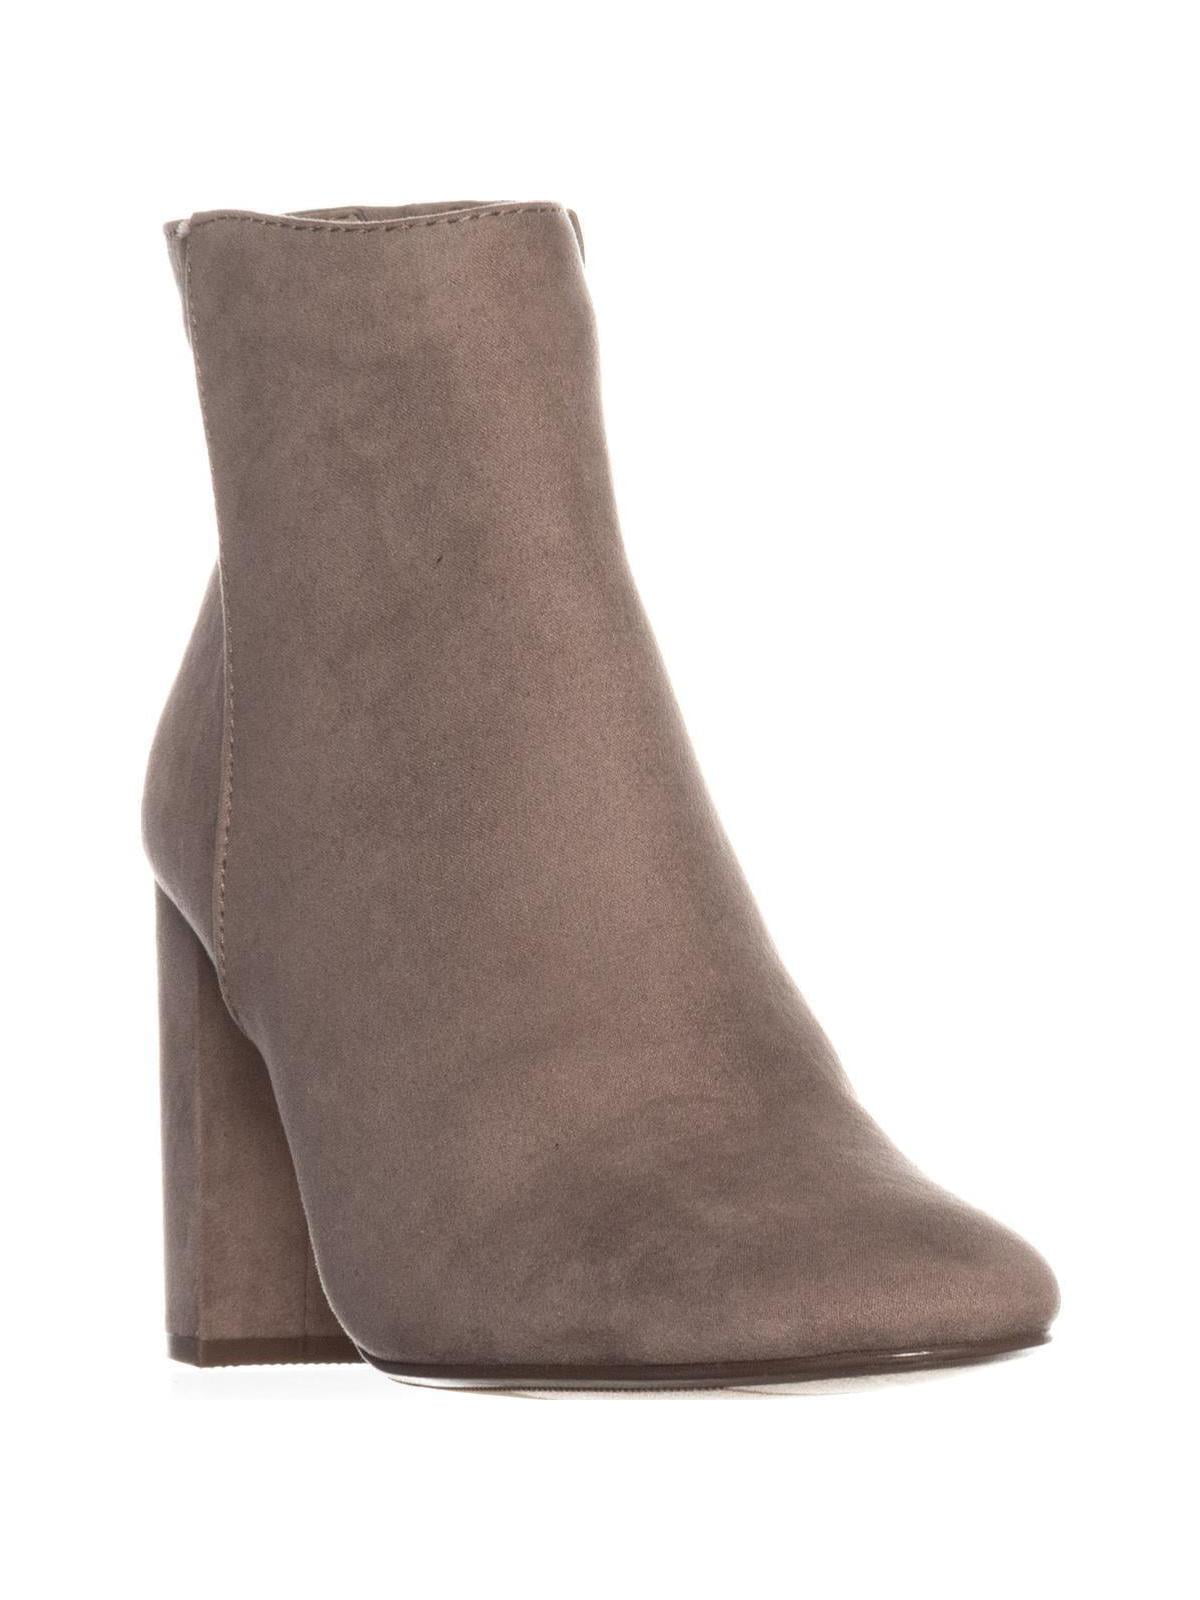 grey ankle boots canada